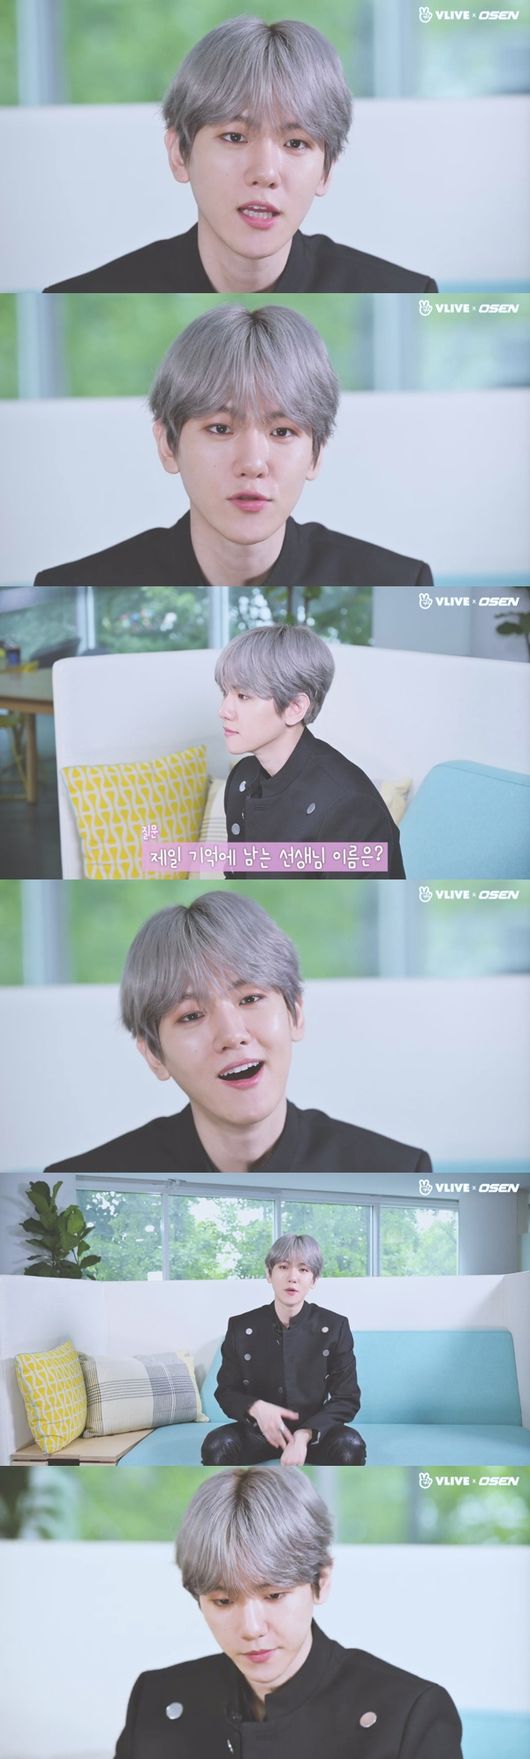 The TMI of the group Exo Baekhyun was released.Baekhyun conducted a TMI interview on the 19th of the Nave V Live channel Star Road.On this day, Baekhyun gave a witty answer to the question baptism of the production team. Baekhyun was born on May 6, and is from Bucheon, Gyeonggi Province.Baek-hyuns favorite movie is John Wick because the action is cool. And Baek-hyuns most admired movie is his parents, and his motto is Only effort is the way to live.Baek said he would choose Pizza if he could only eat one food for a week. I personally love Pizza. Its been a long time since I havent eaten it.Baekhyuns most confident field was singing and playing games. I am confident that the song has been going on since I was a child, and the game is so good, he said.In the meantime, Baekhyun expressed his desire for his professional gamer debut. I want to try professional gamers. I want to go to e-sports while staying with professionals properly.I think its a new challenge, he said.Baekhyun, who said he did not want to unpack his study paper when he was a child, said, I was always pushed for two to three weeks.I confessed to my mother in the second grade, I do not know why I should do this. I have told her that I will not sit down.The toy I liked as a child was a transformation robot. It was a train-shaped and changing robot.If you are similar in age to me, you will know. Baekhyun built a three-way poem in his name, which was based on what he had already built in elementary school. Baekhyun said, Byeon Baek-hyun built a three-way poem that would make a million fans.It became a reality, he said. There is a data screen. My mother took it when I was a child.I like the fine dust levels these days, and fine dust has been good for a week as of today, so I am so happy these days, said Baekhyun.The weather is cool and not hot, he said.Baekhyuns sense of power was also brilliant. Baekhyun asked about his superpowers, saying, What do you need more than light already?He also laughed at what he did just before he was asleep, saying, I brush my teeth and watch the video site, drop my cell phone on my face, and fall asleep.Finally, Baekhyun answered the best of the best, the best of the best, the charm, and the friendly appearance, and finished the TMI interview.V live broadcast screen capture